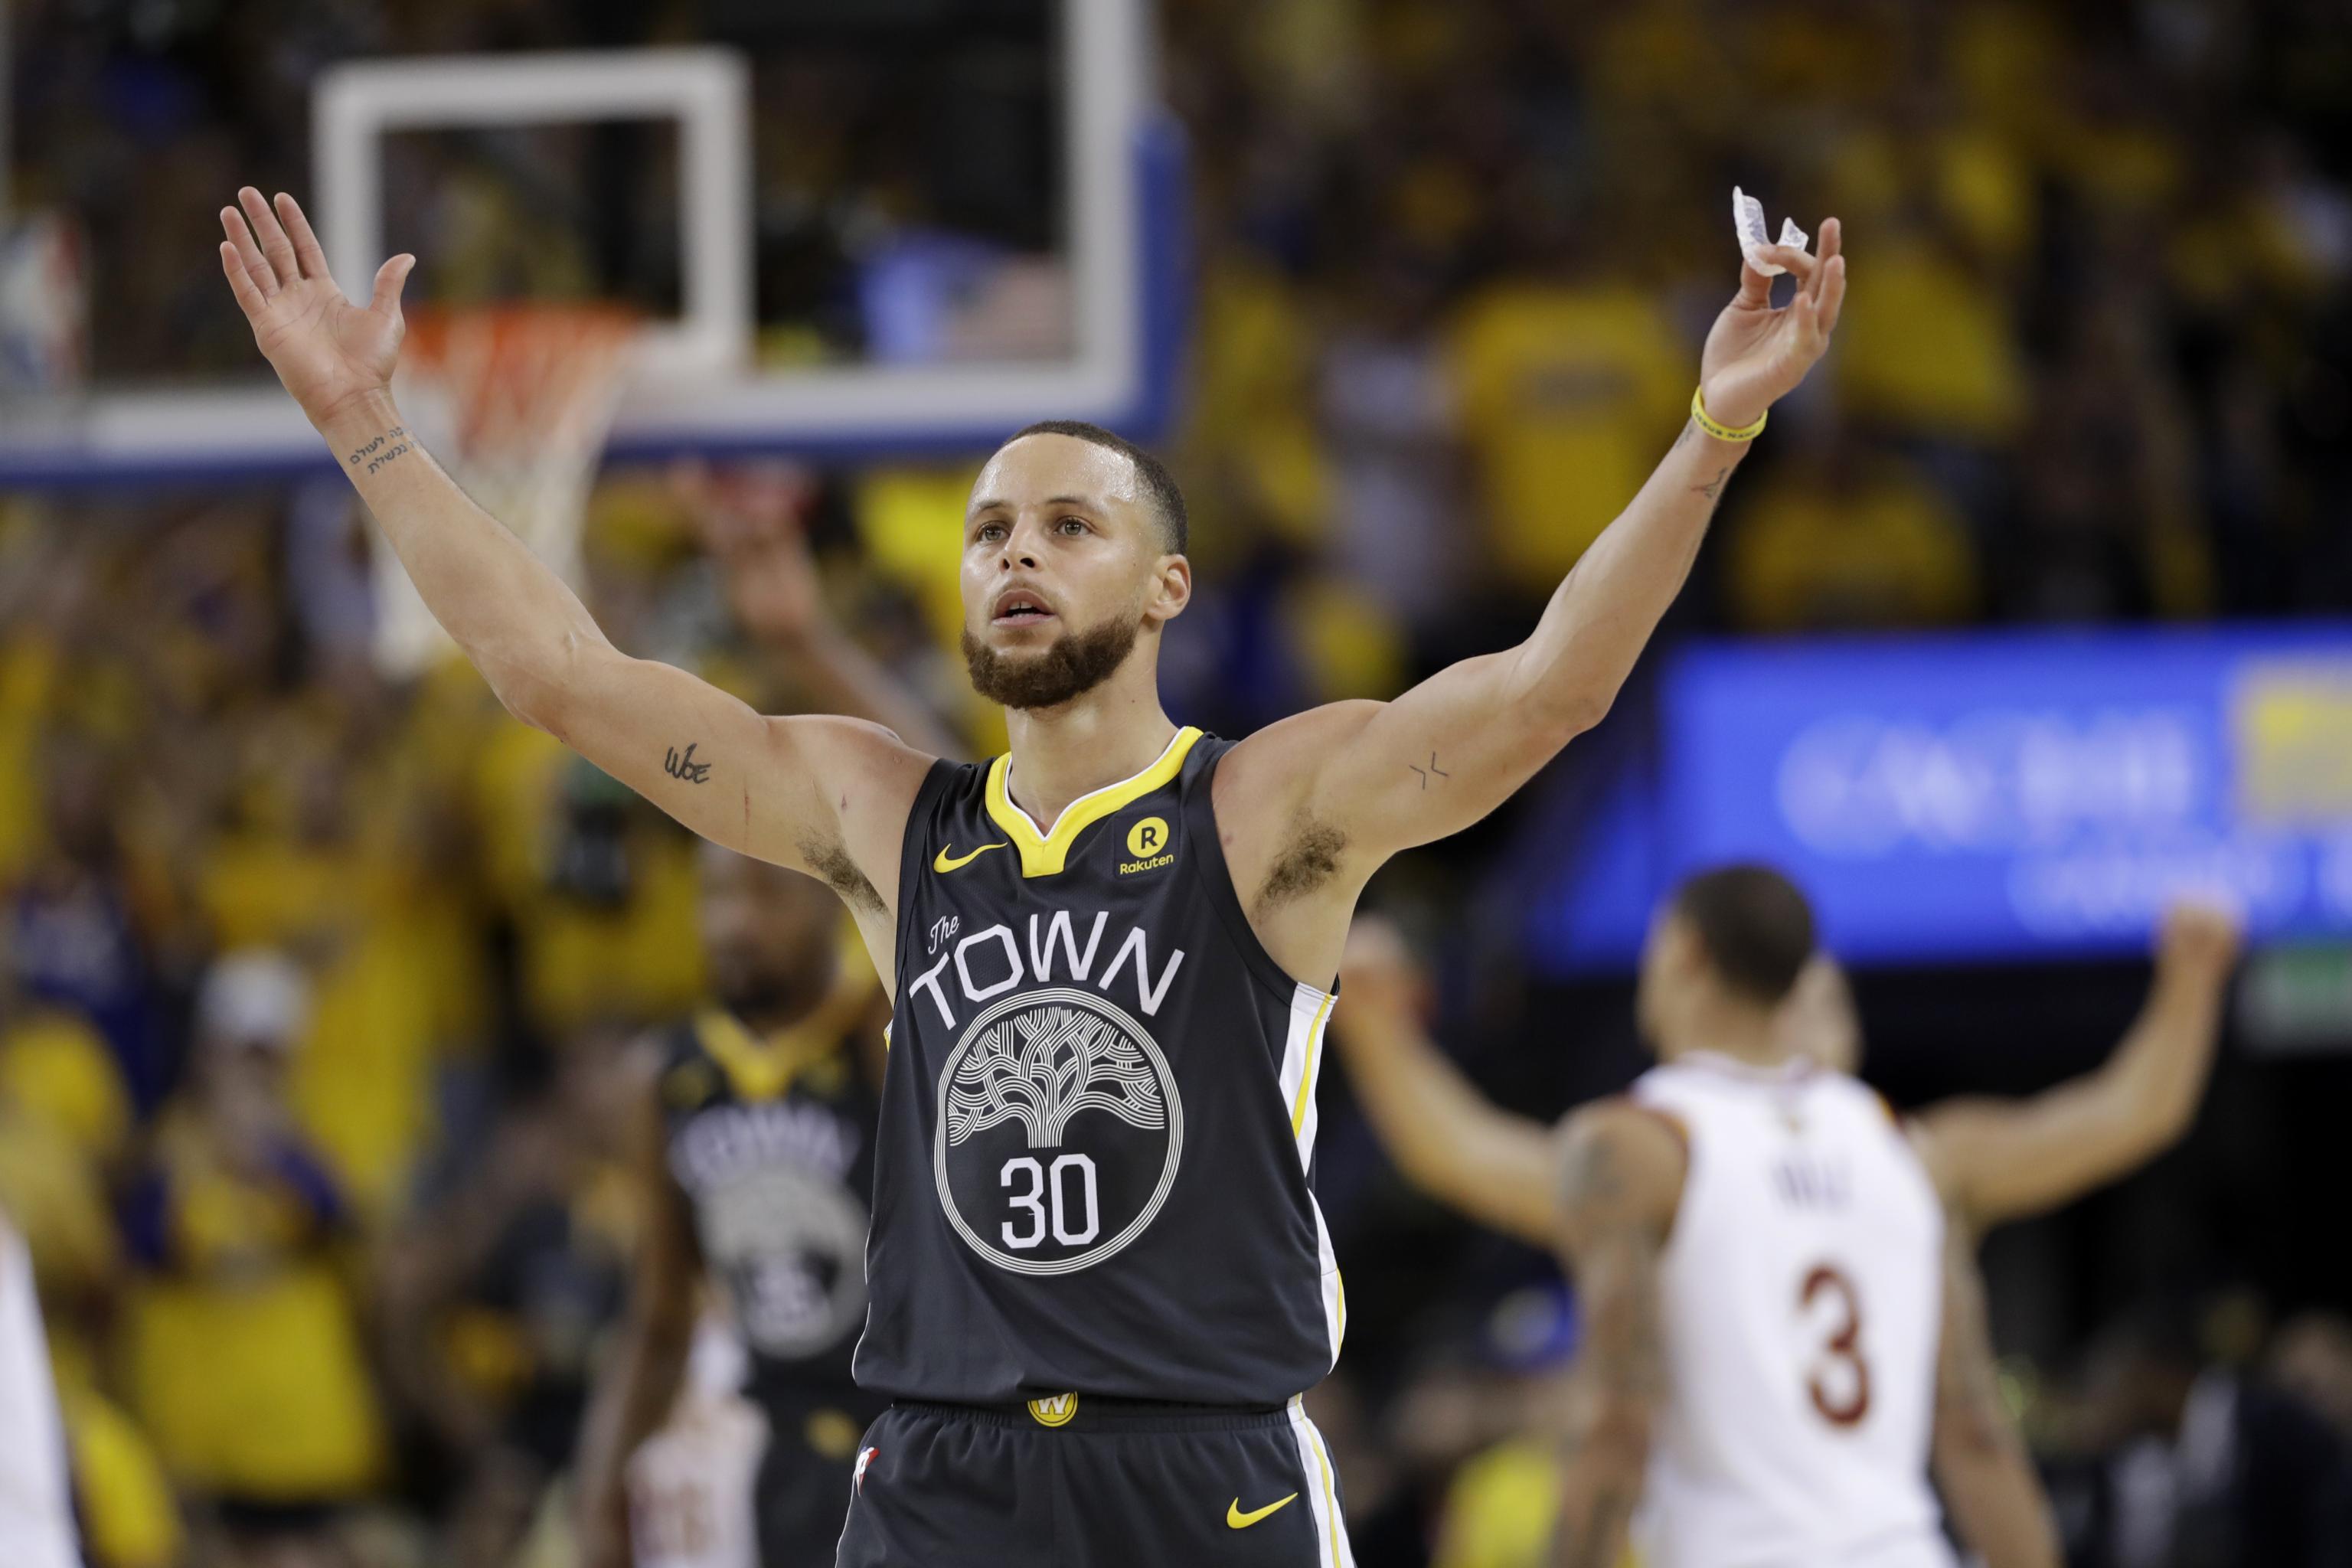 Town business: Steph Curry and Warriors could be in for a long